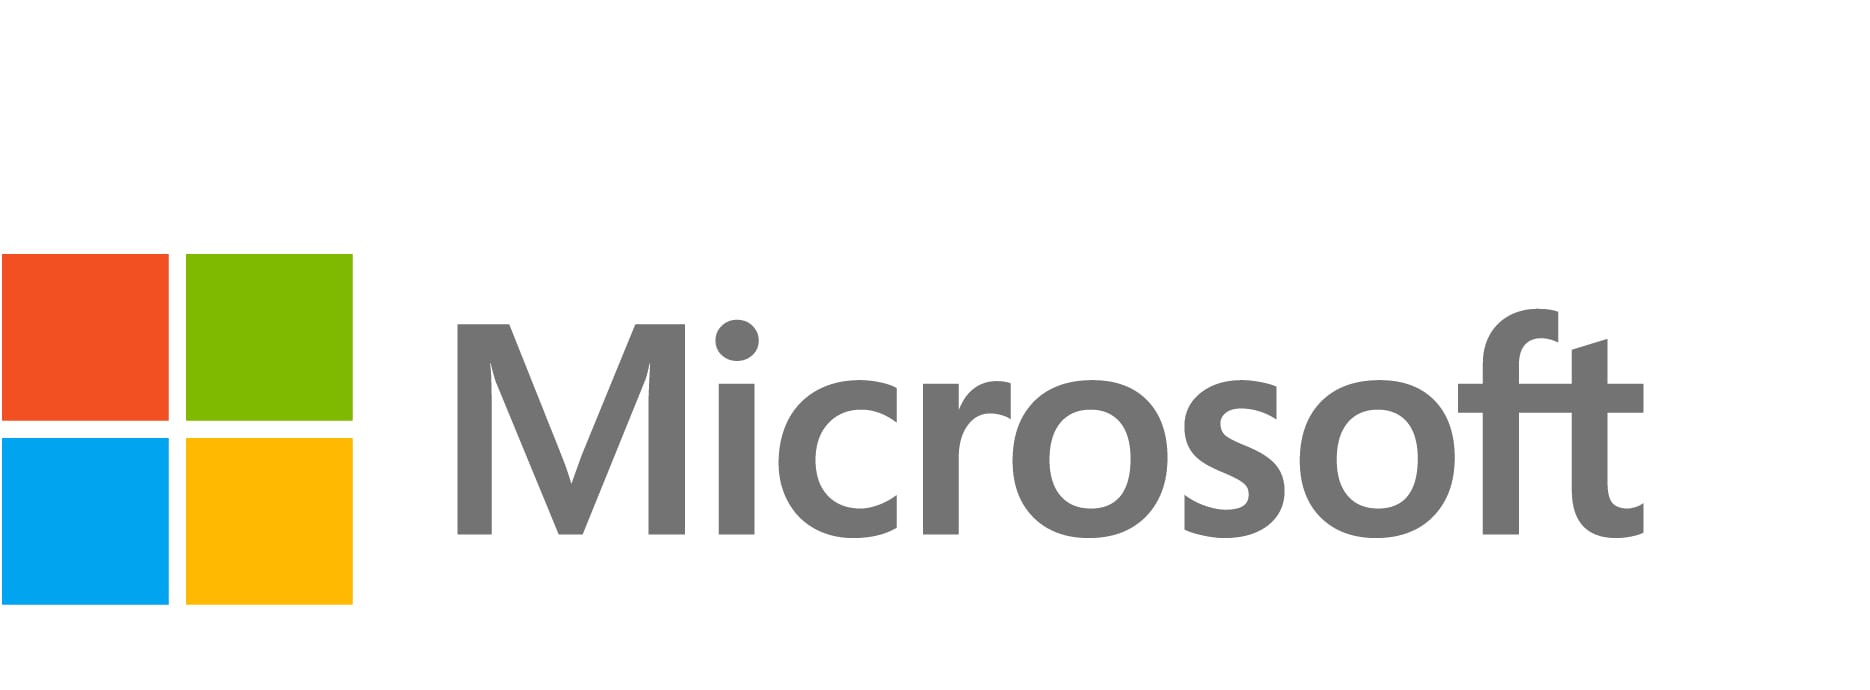 Microsoft 3 Year Complete for Business Protection Plan-Surface Laptop